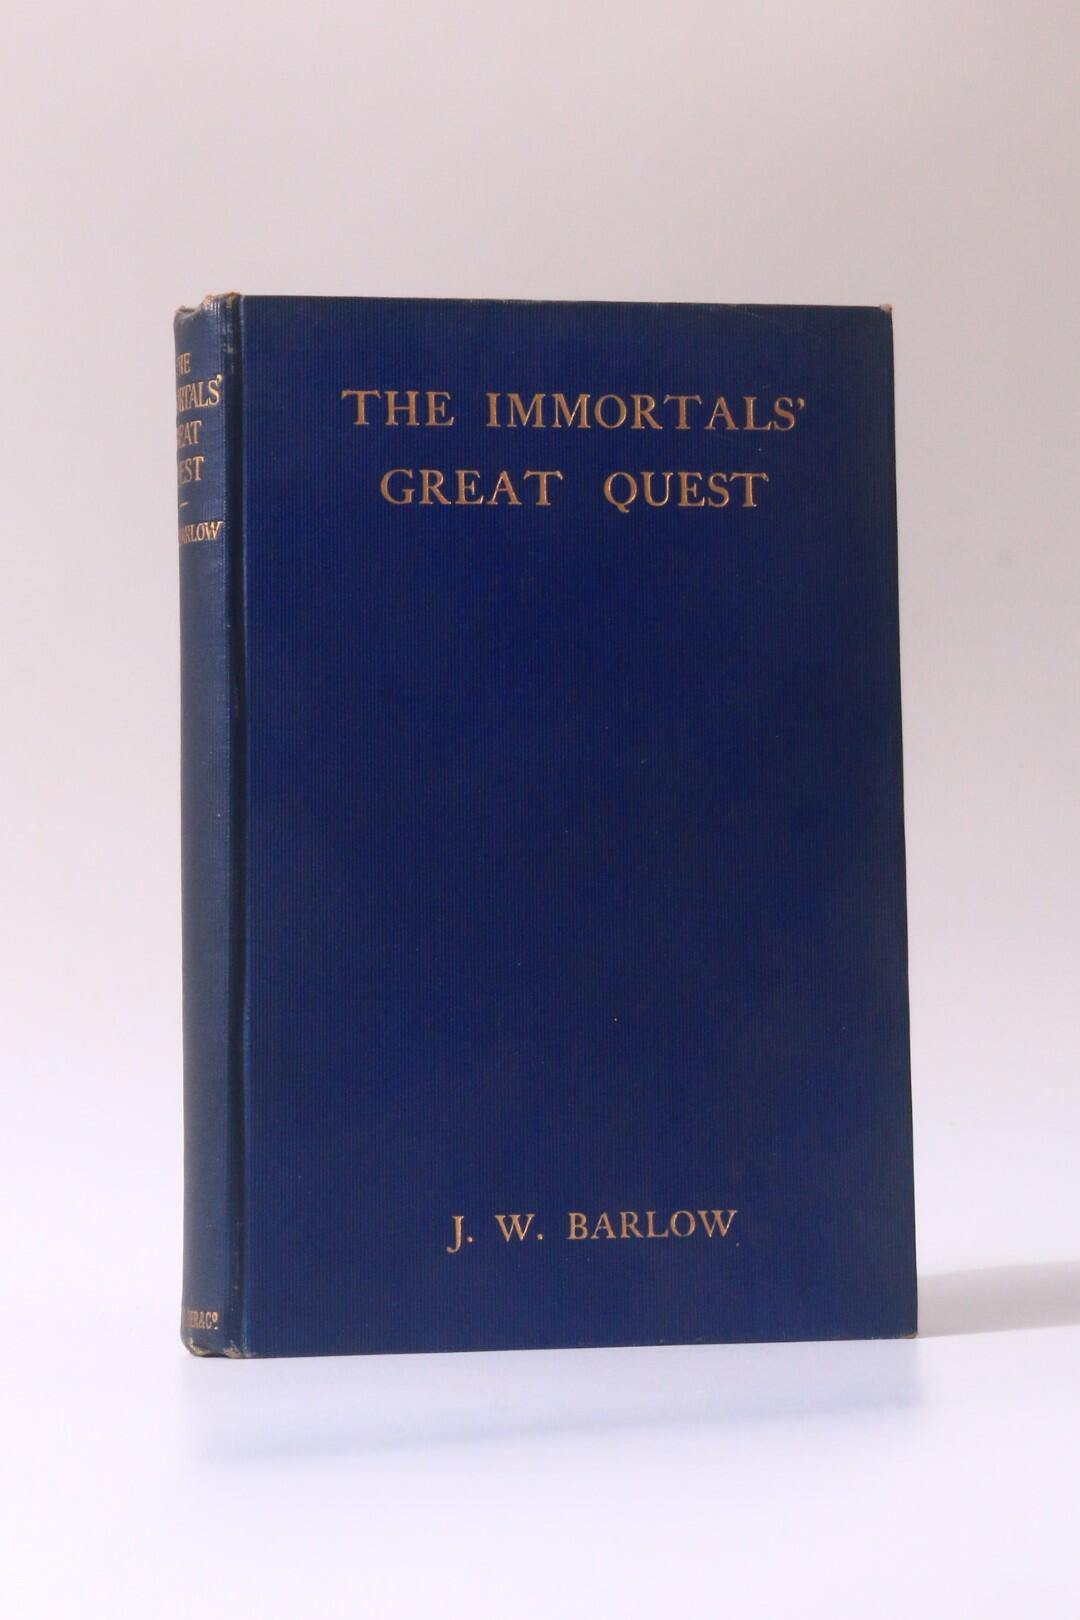 J.W. Barlow - The Immortals' Great Quest - Smith, Elder & Co., 1909, Second Edition.